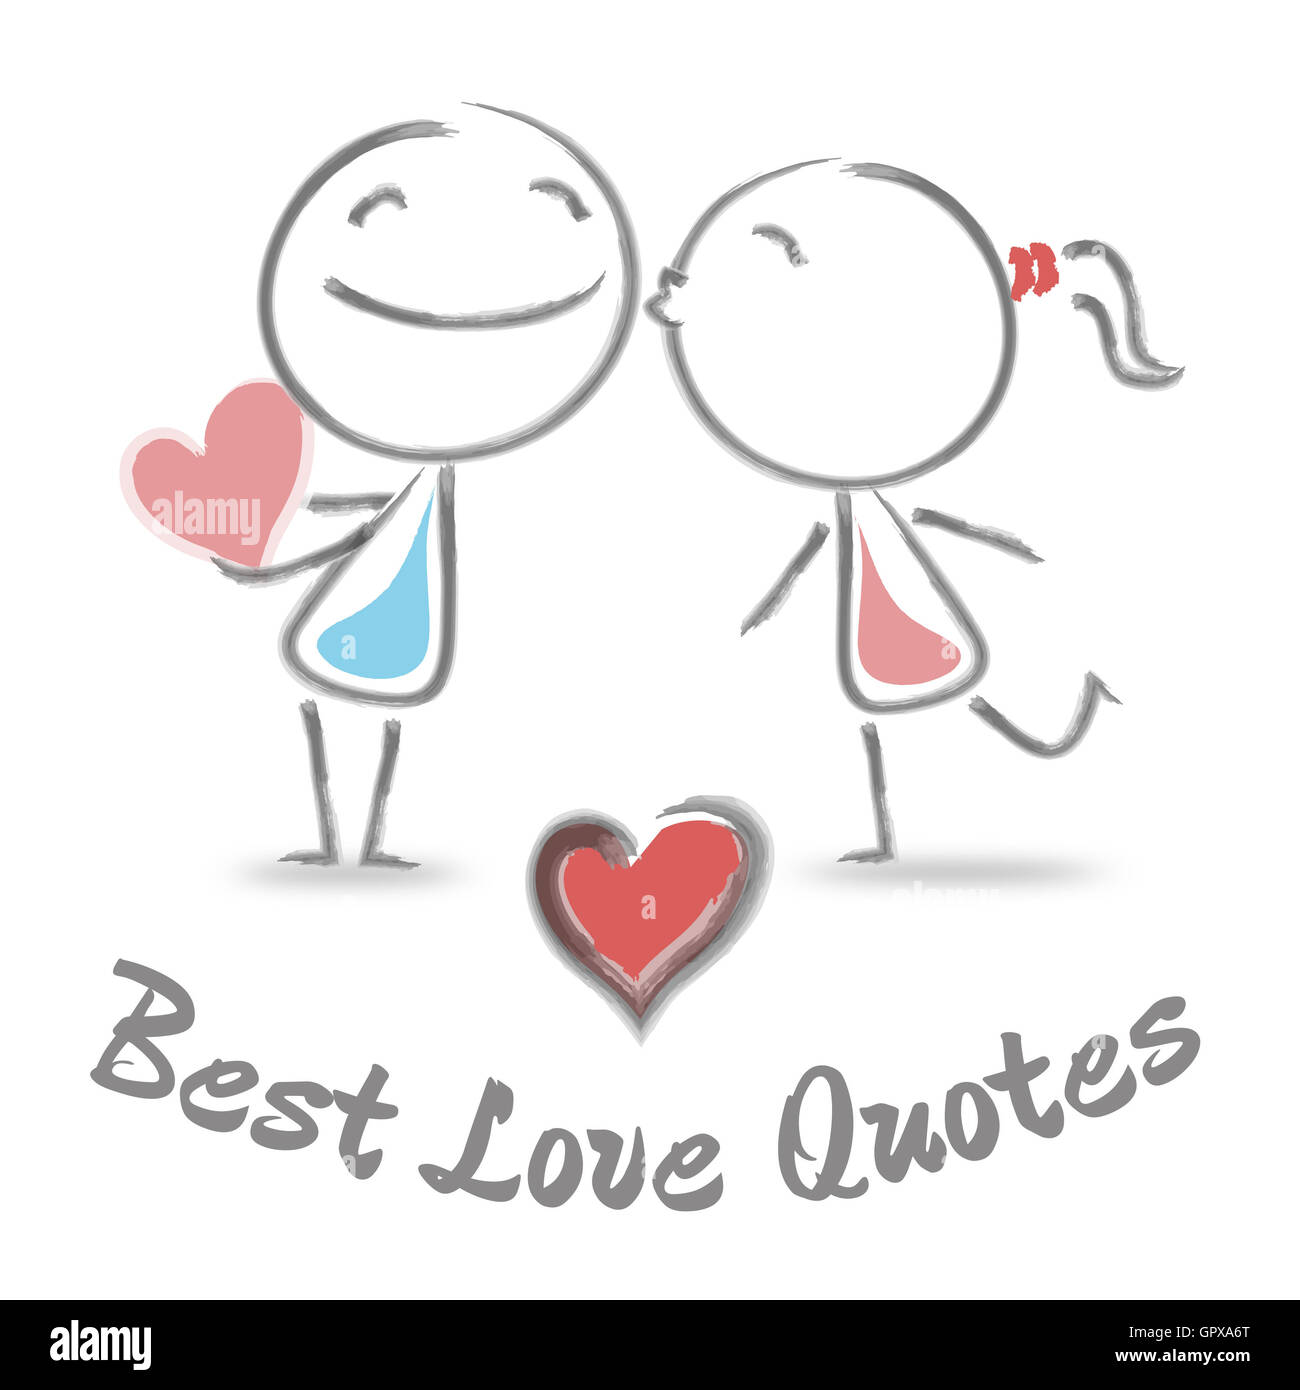 Best Love Quotes Indicating Good Inspirational And Extracts Stock Photo